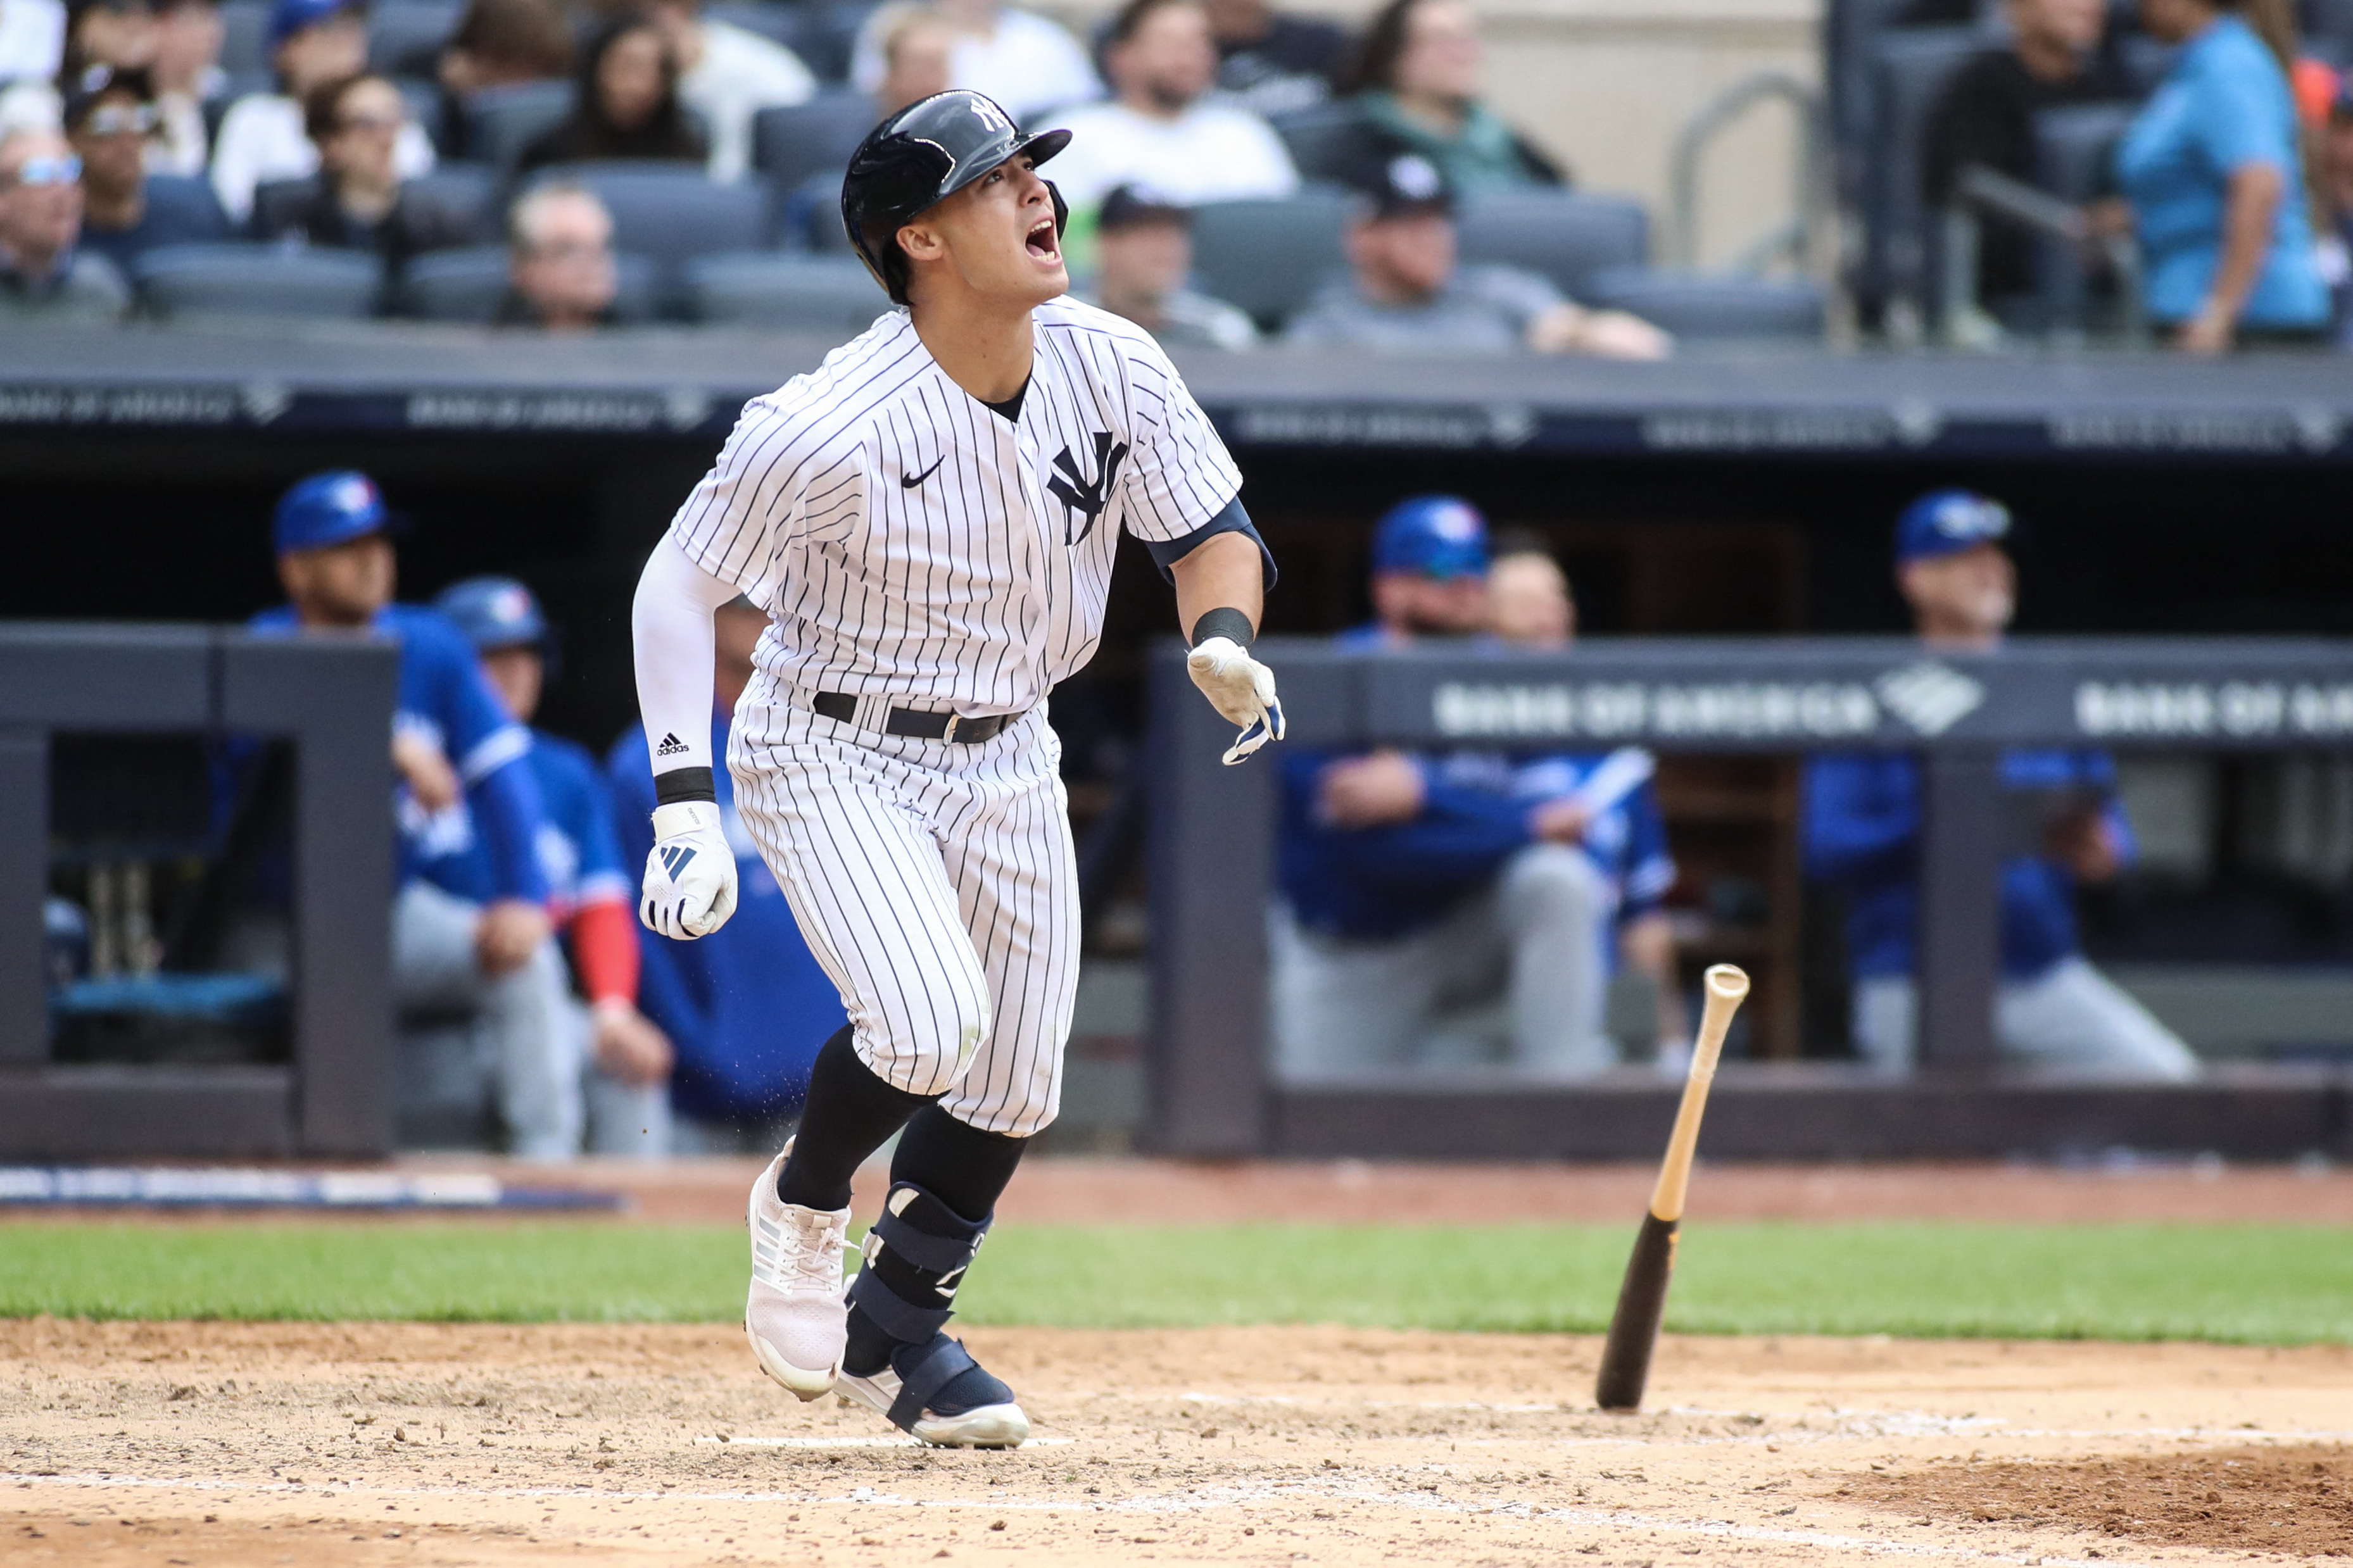 Yankees win on DJ LeMahieu's walk-off hit, securing 3-2 win over Jays -  Pinstripe Alley